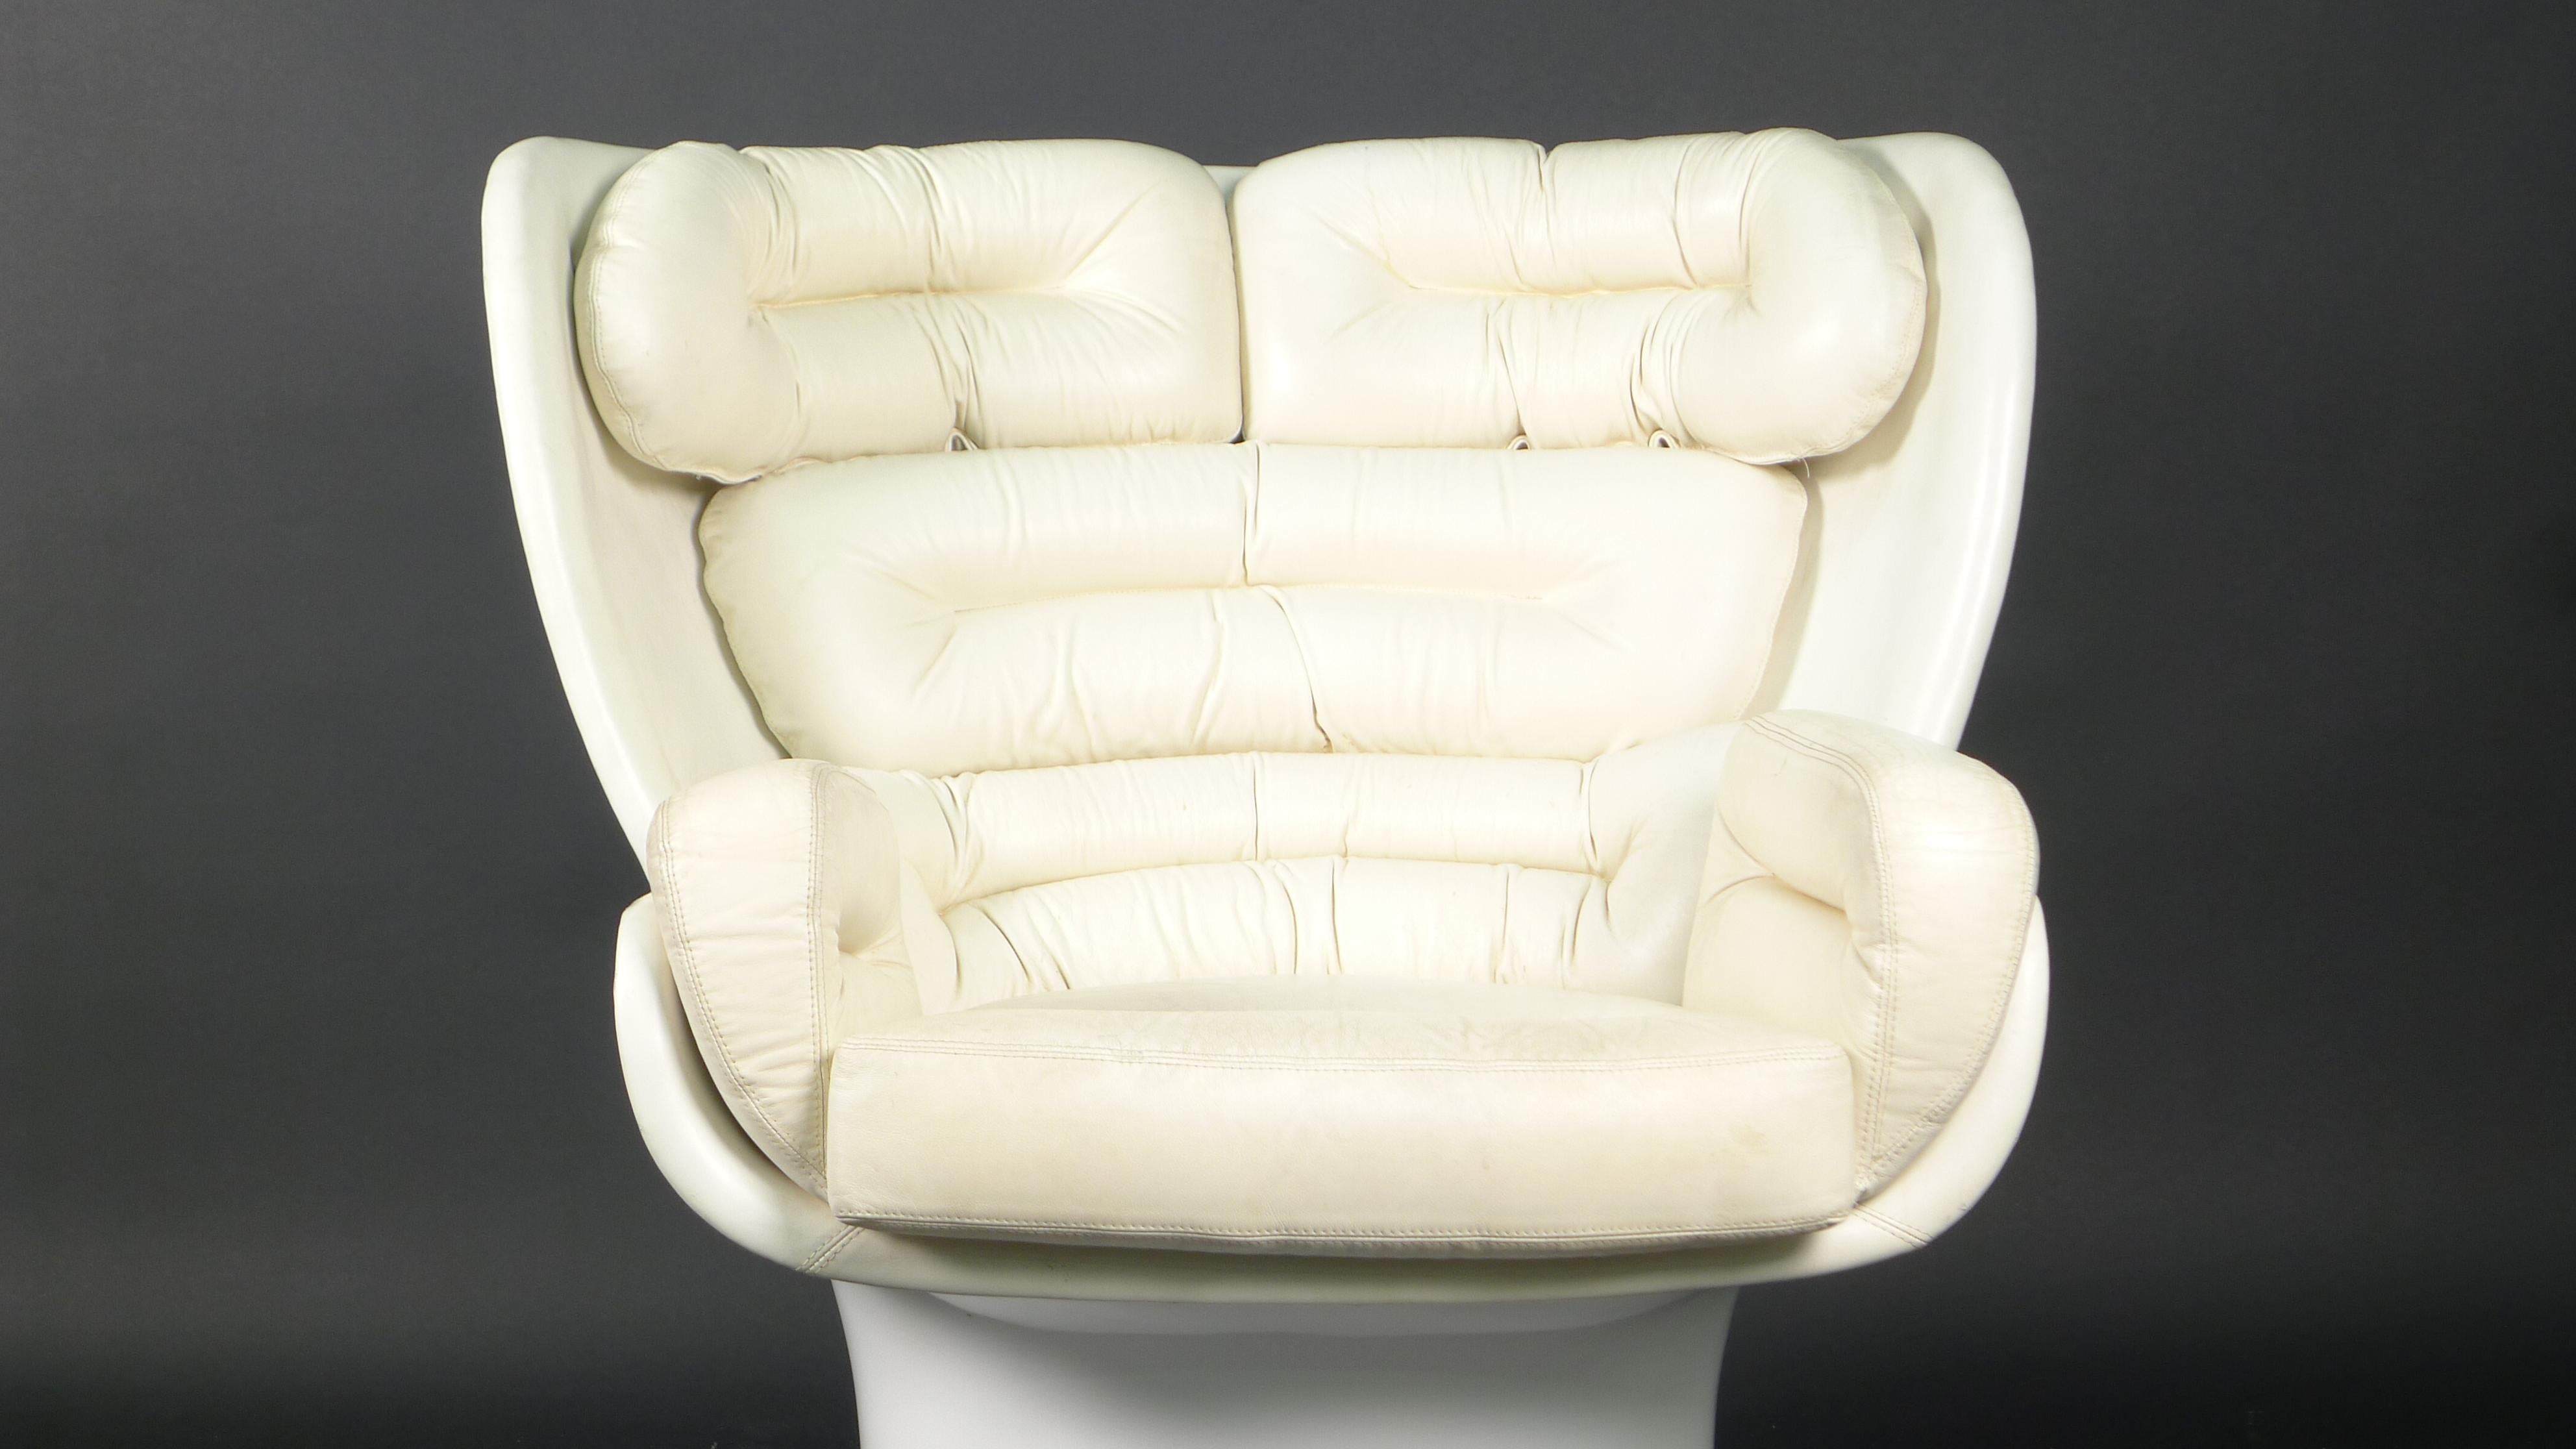 Joe Colombo 'Elda' Lounge Chair, White Leather and Fibreglass, by Comfort, Italy In Good Condition In Wargrave, Berkshire